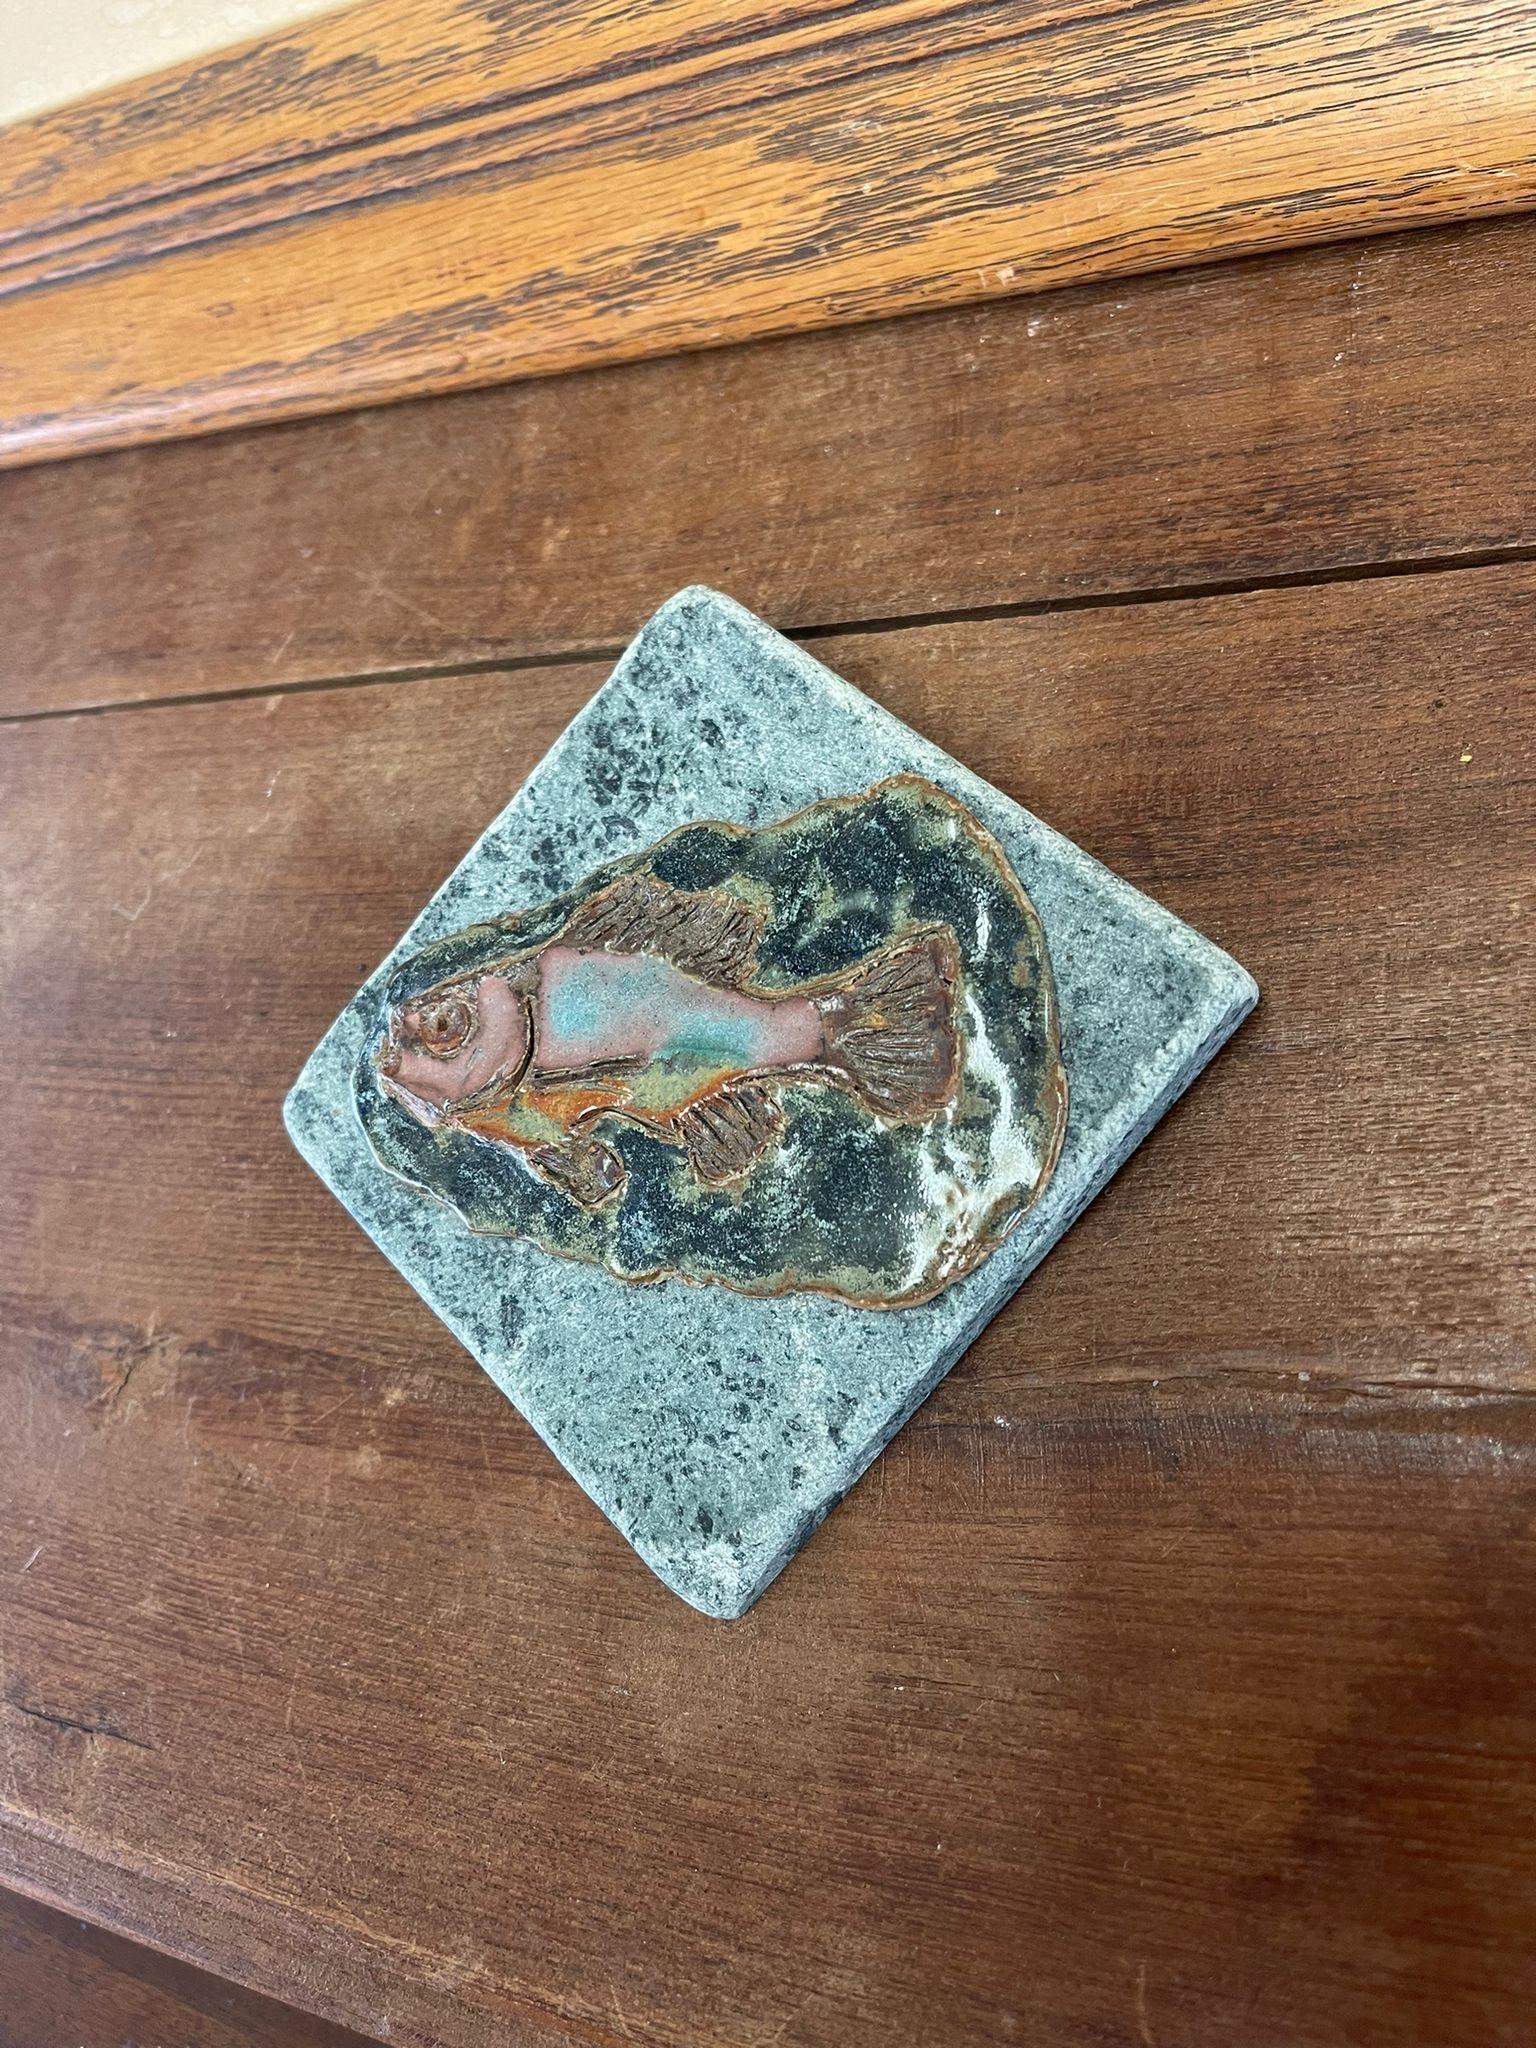 This Piece of Ceramic Artwork has been placed on top of a stone or marble base.Unable to verify if the base is stone or marble. Wall hanging hook on the back. No Makers mark. Vintage Condition Consistent with Age as Pictured.

Dimensions. 4 W ; 4 D